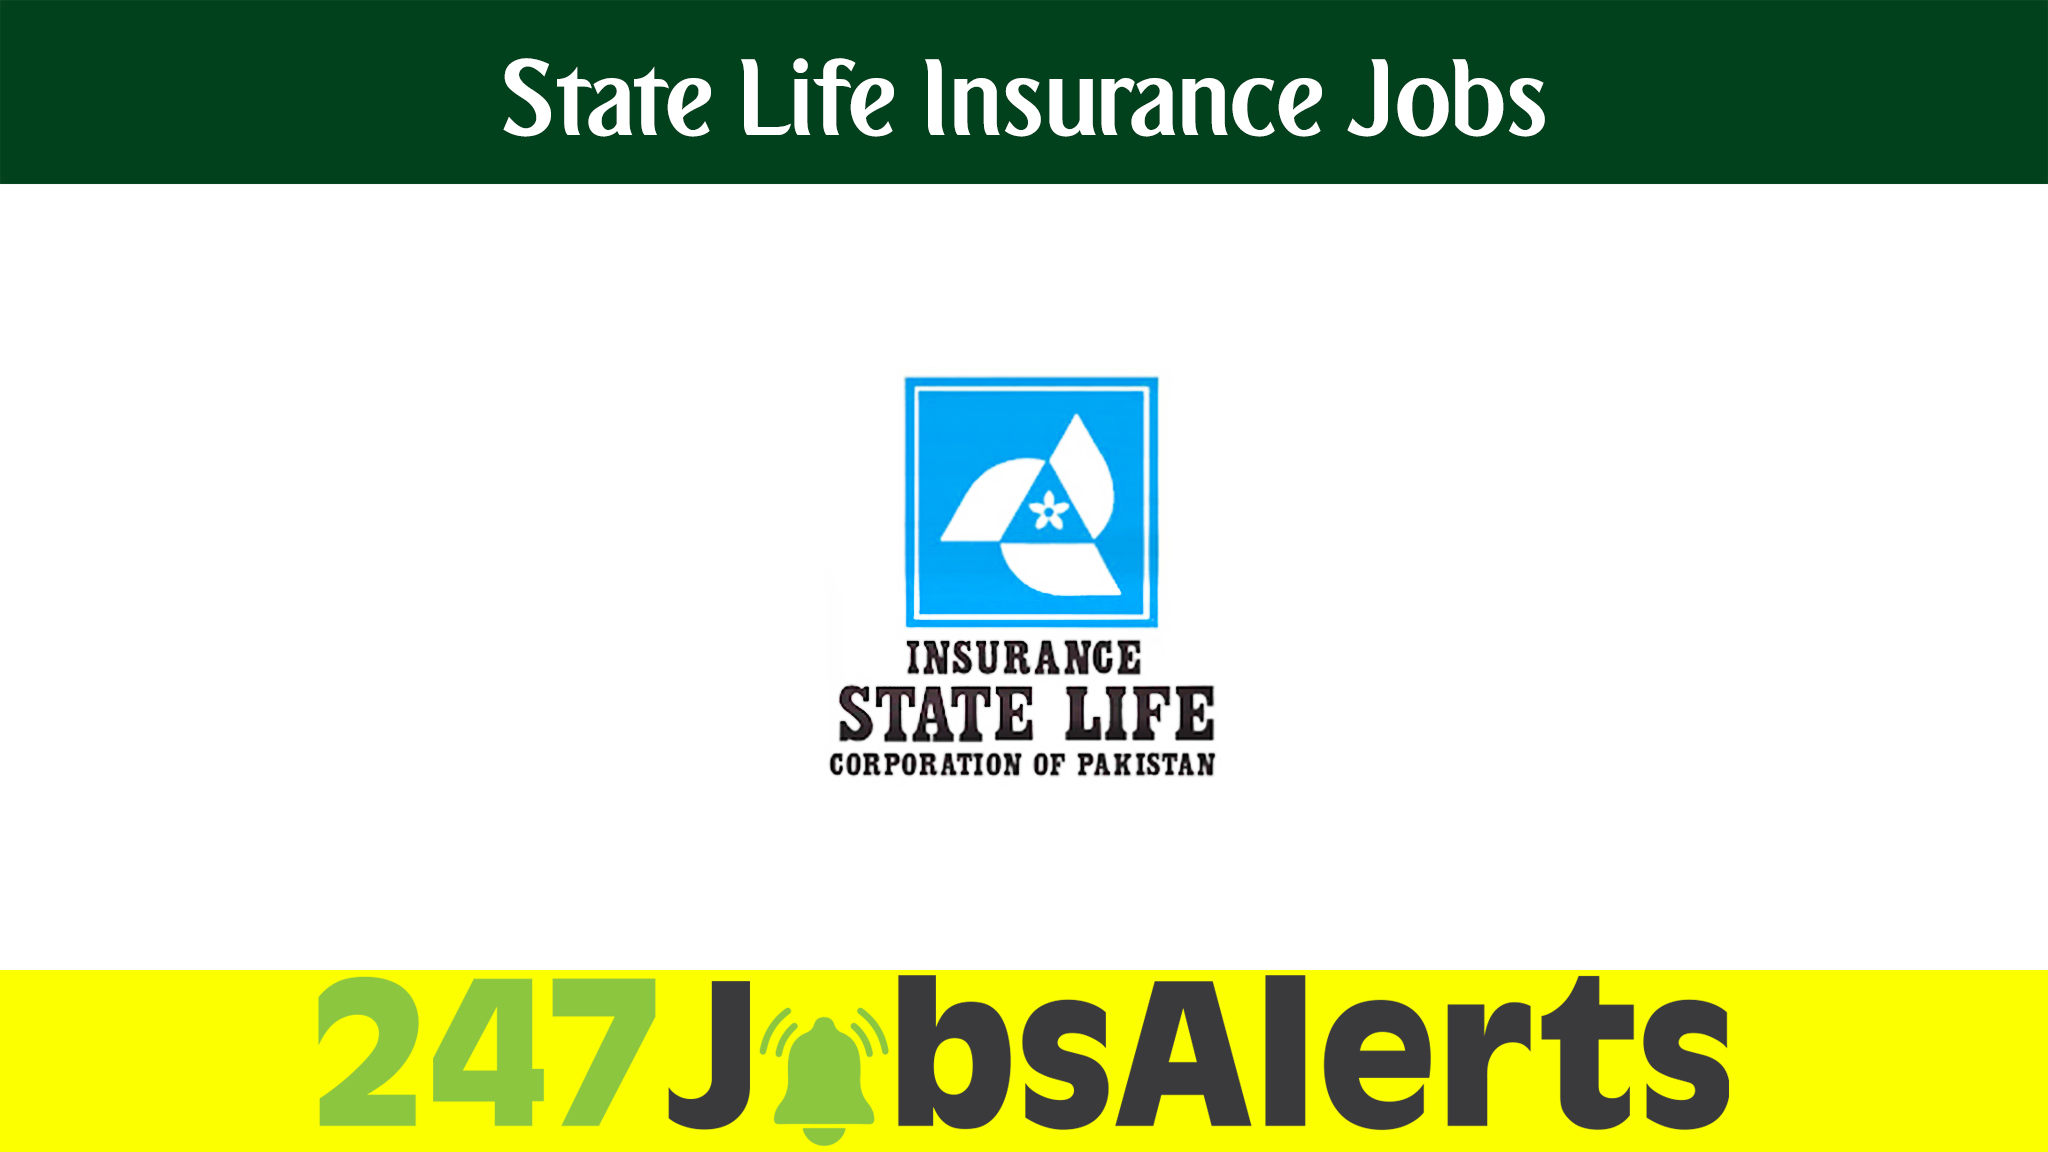 State Life Insurance Jobs